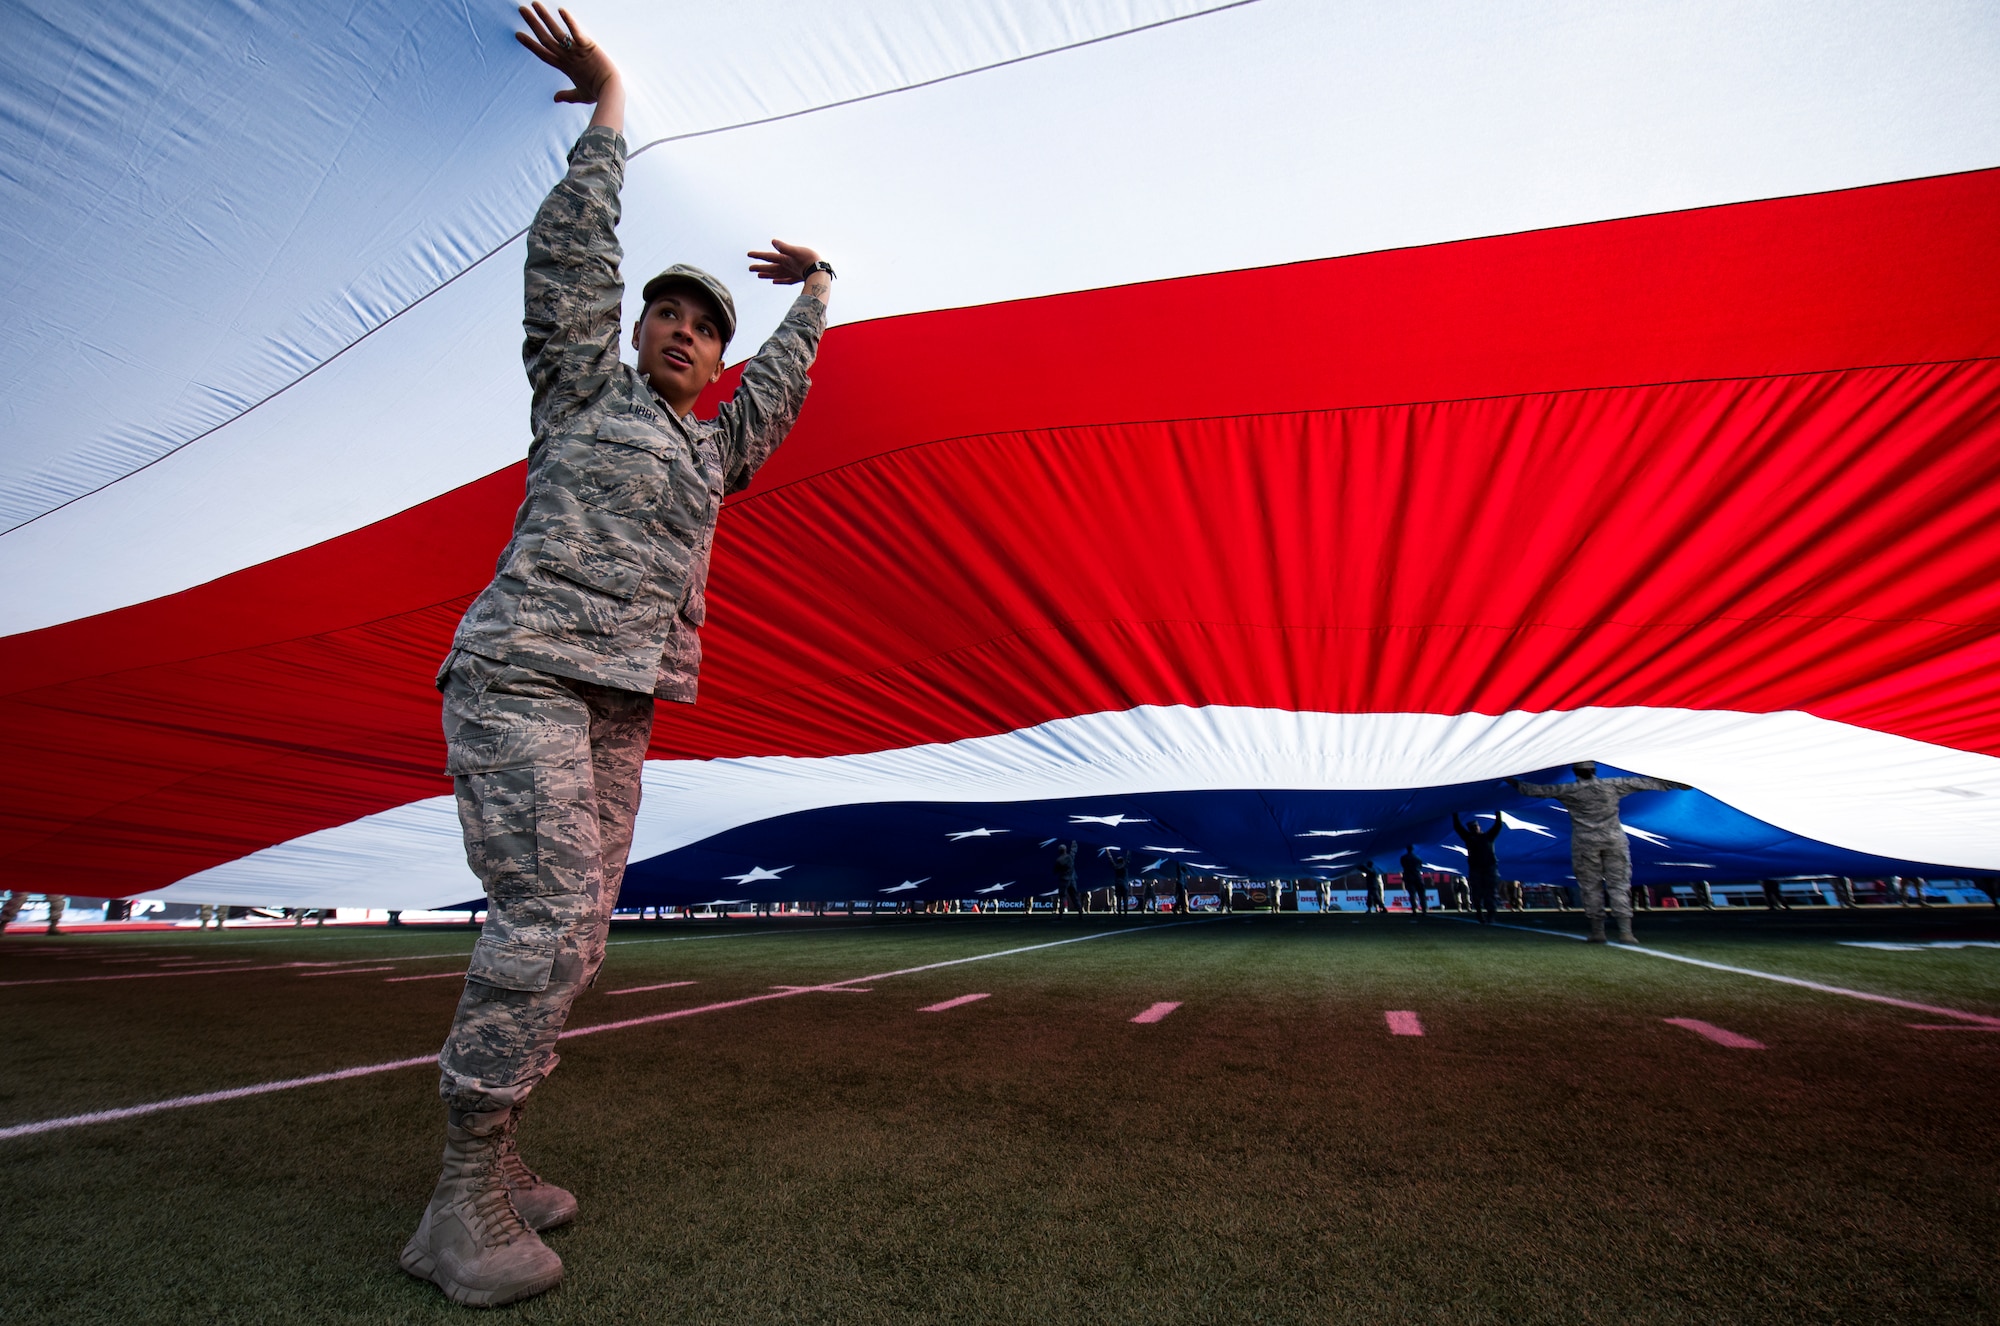 Airman 1st Class Ashley Libby, an aerospace medical technician assigned to the 99th Medical Operations Squadron at Nellis Air Force Base, Nevada, holds up a section of a half-ton American flag during the 2018 Las Vegas Bowl opening ceremony at Sam Boyd Stadium in Las Vegas, Dec. 15, 2018. More than 200 Airmen volunteered to carry the flag. (U.S. Air Force photo by Senior Airman Andrew D. Sarver)